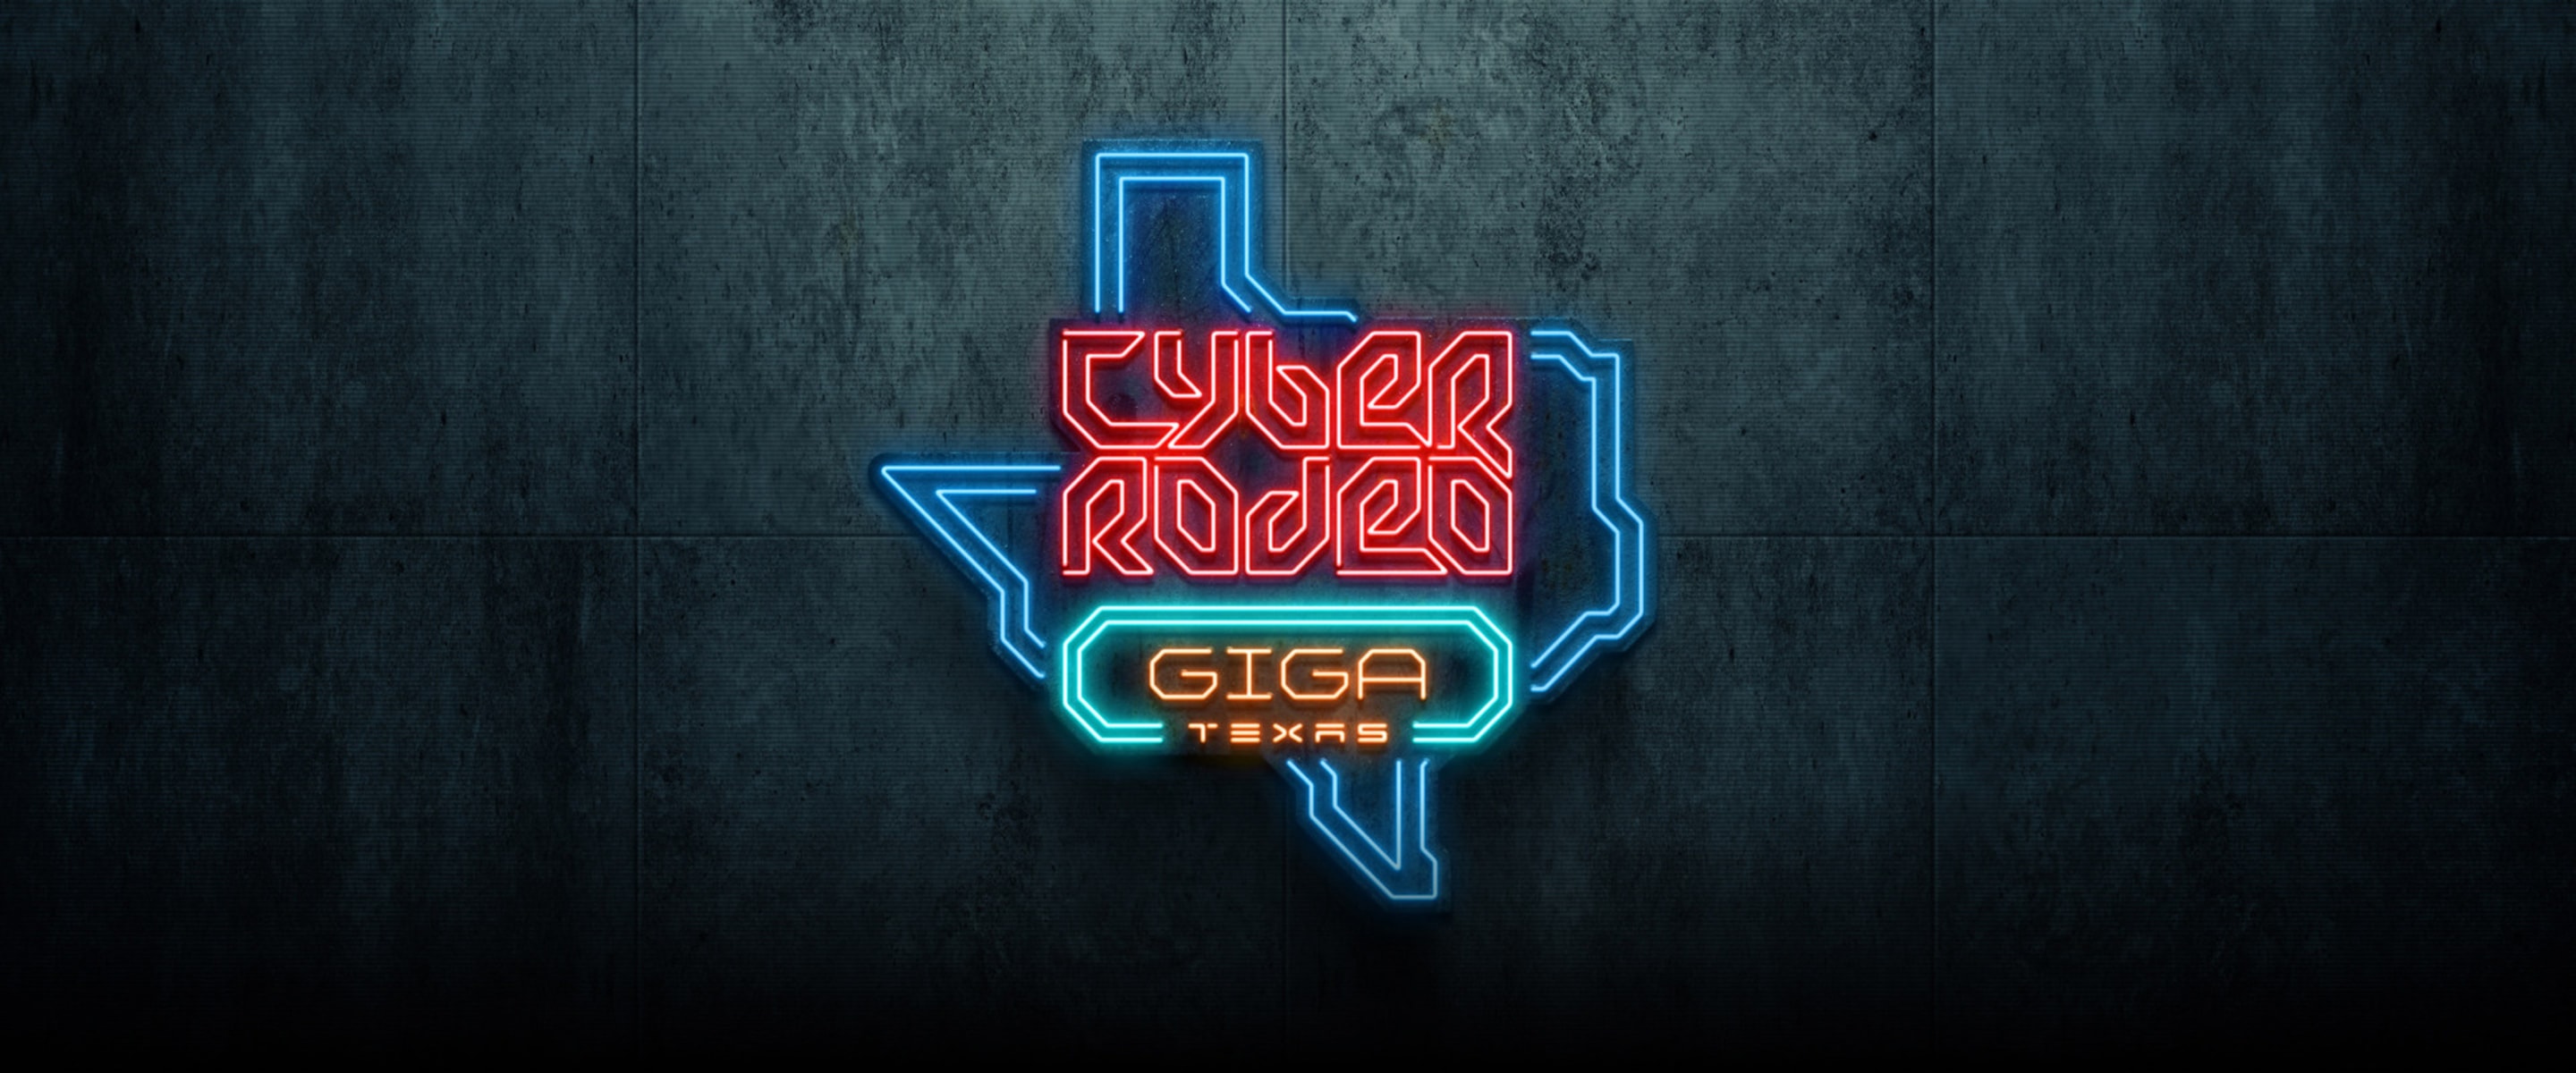 Cyber Rodeo Graphic